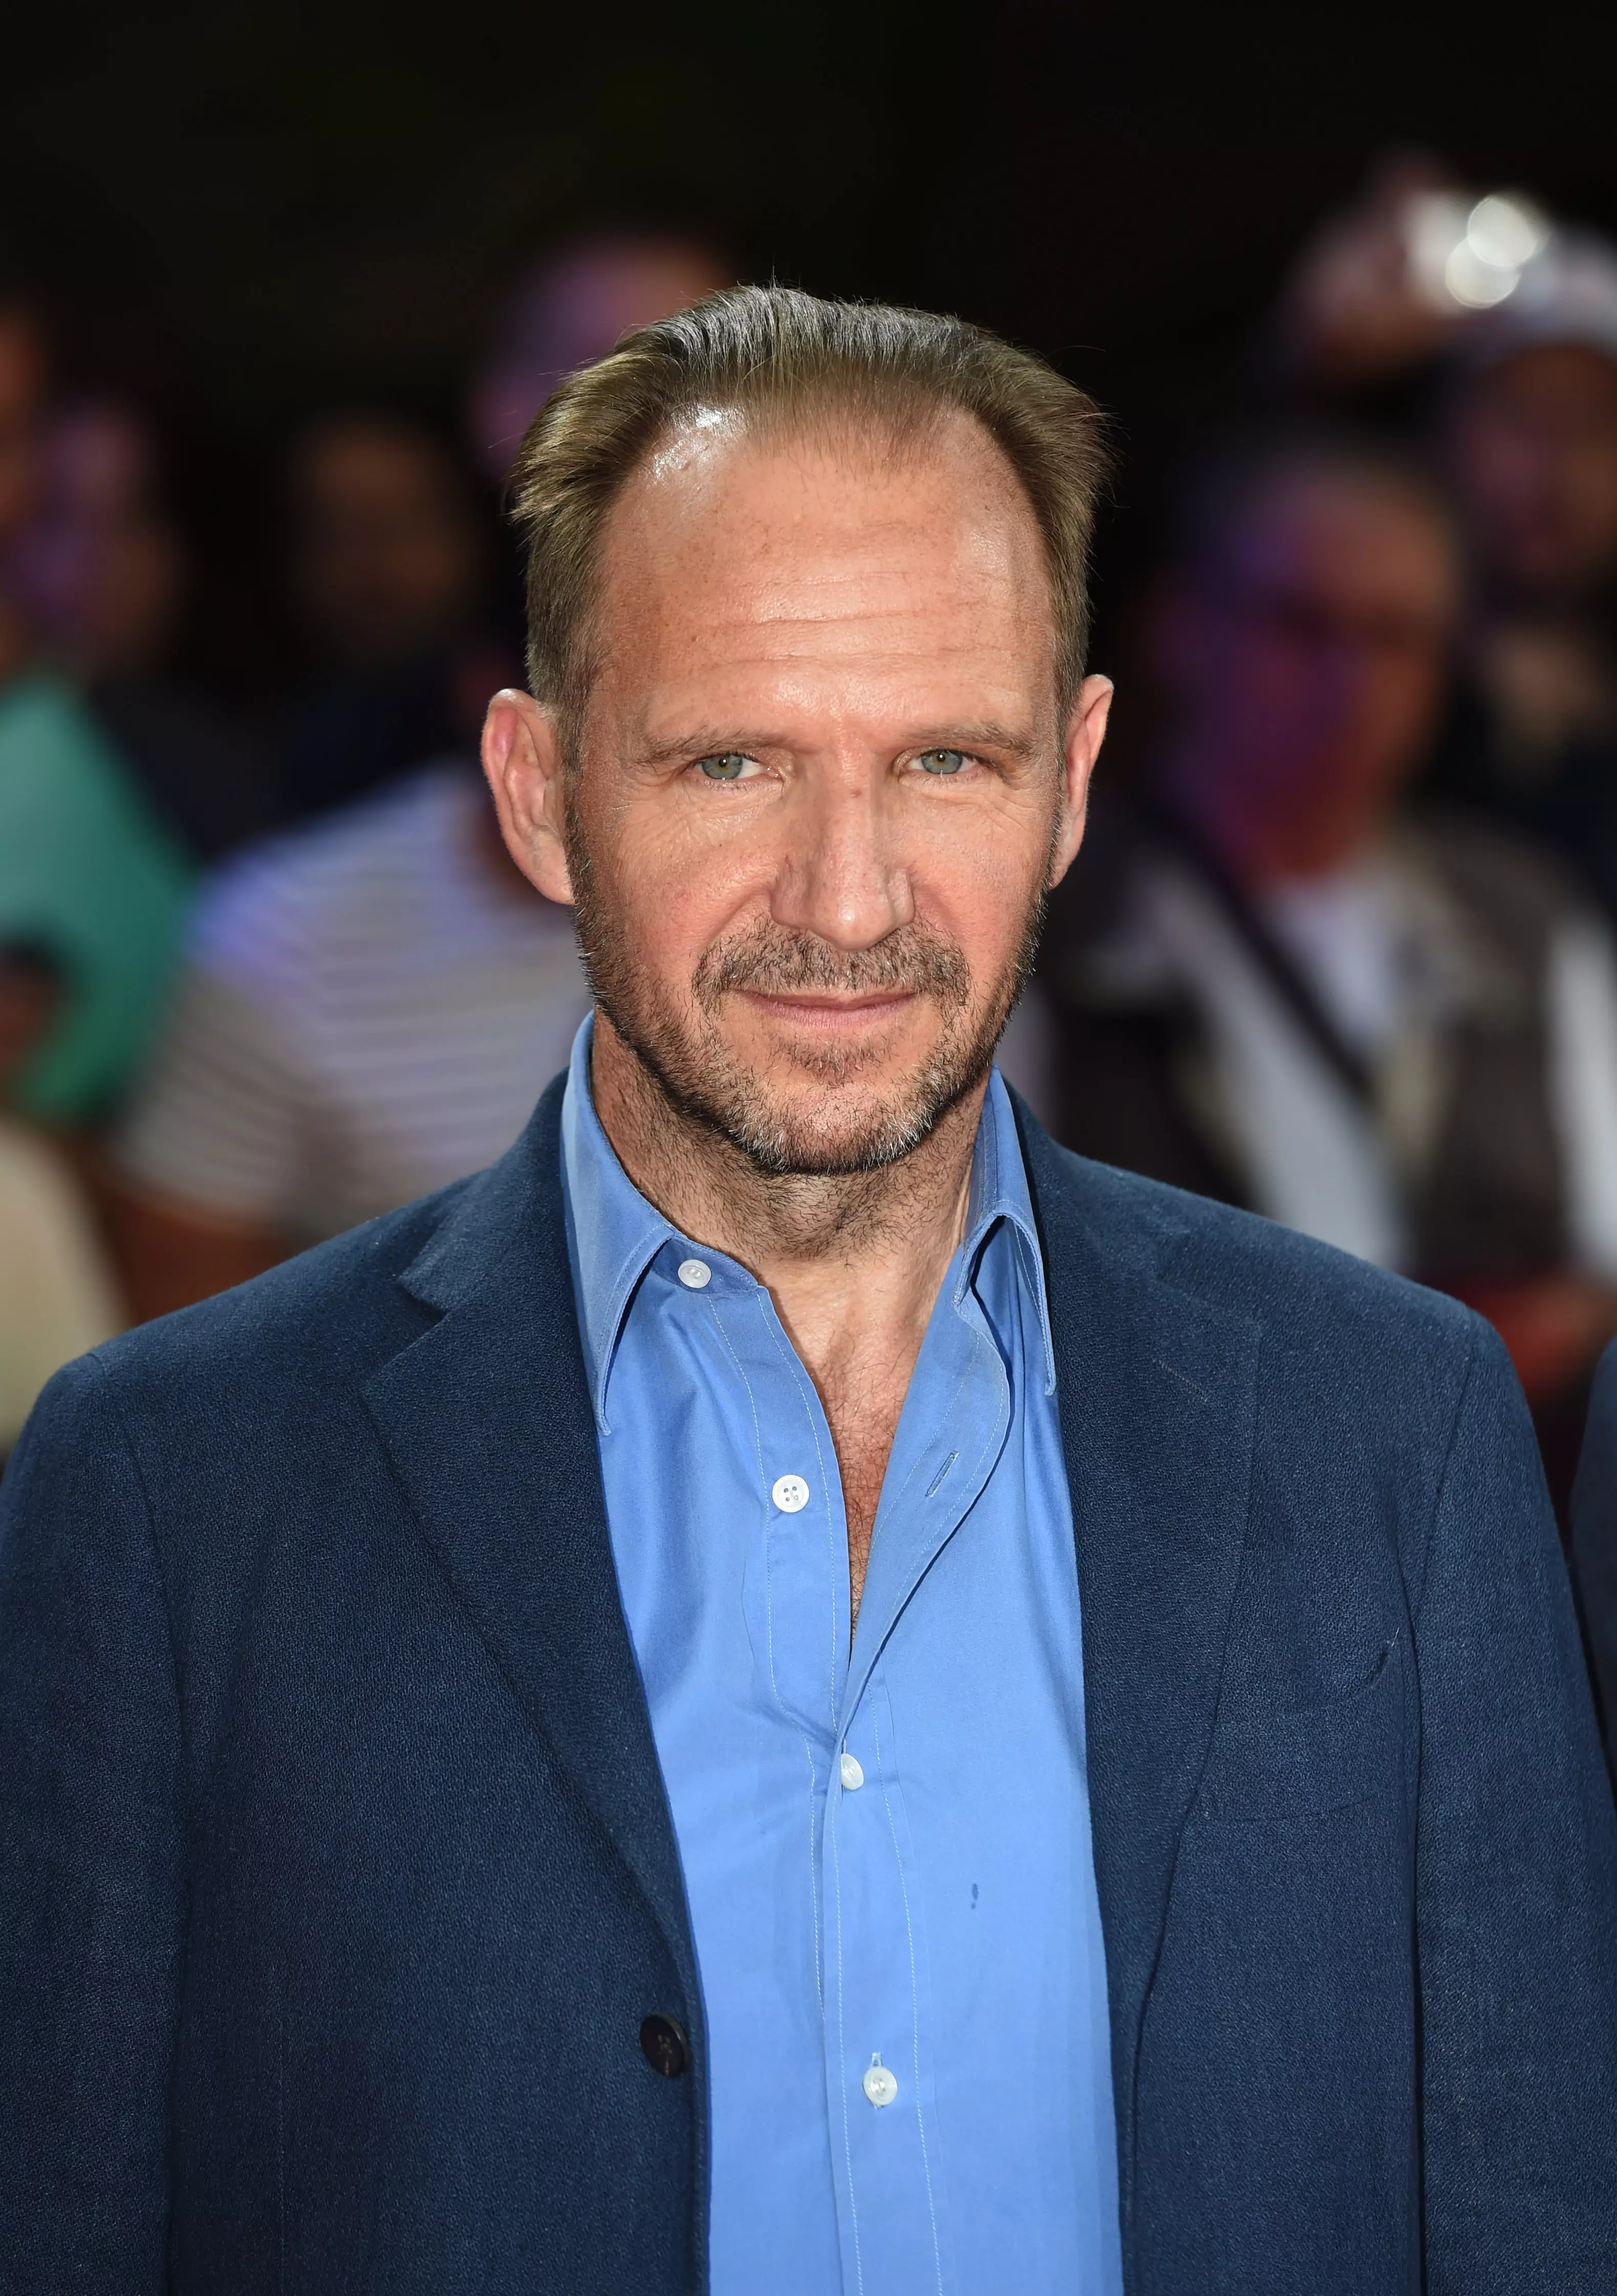 Ralph Fiennes will star in The King's Man.